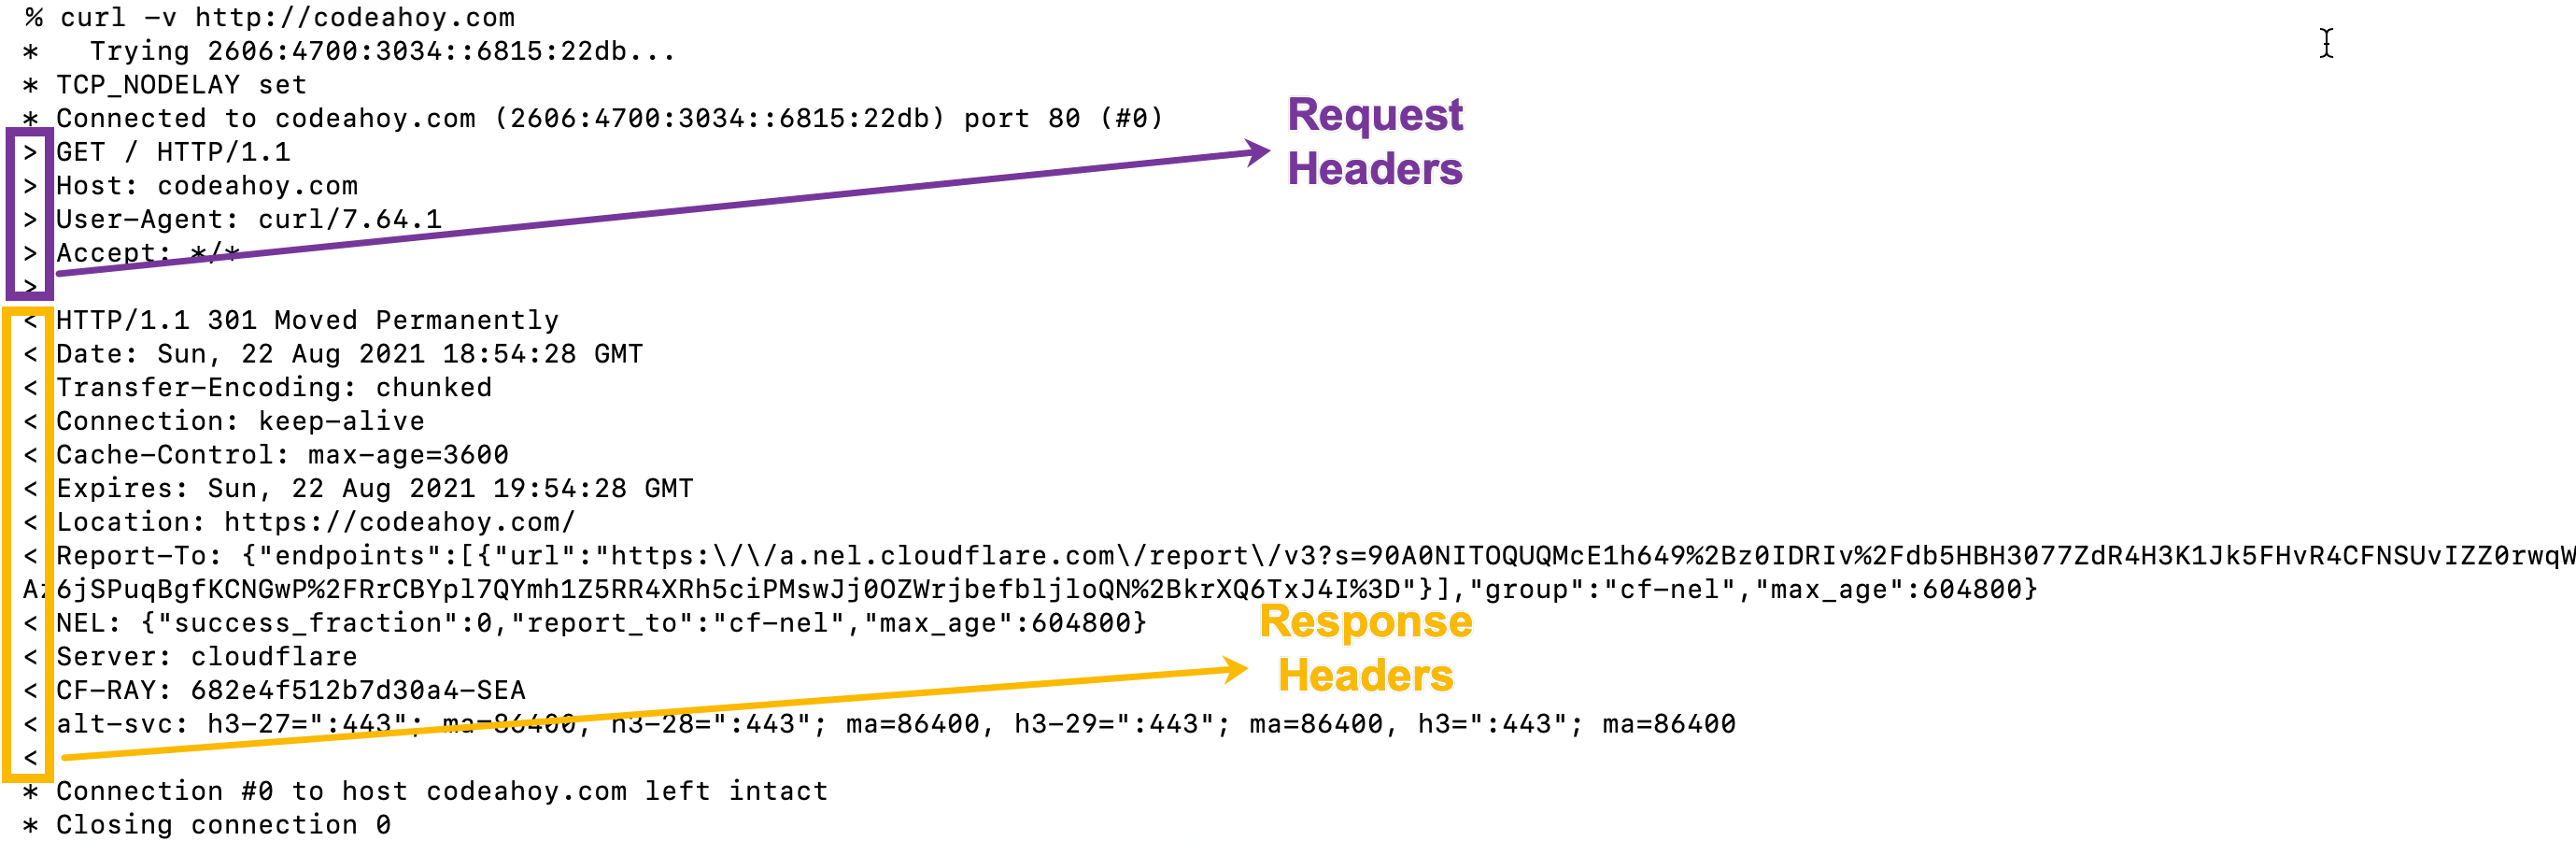 curl output showing request and repsonse headers